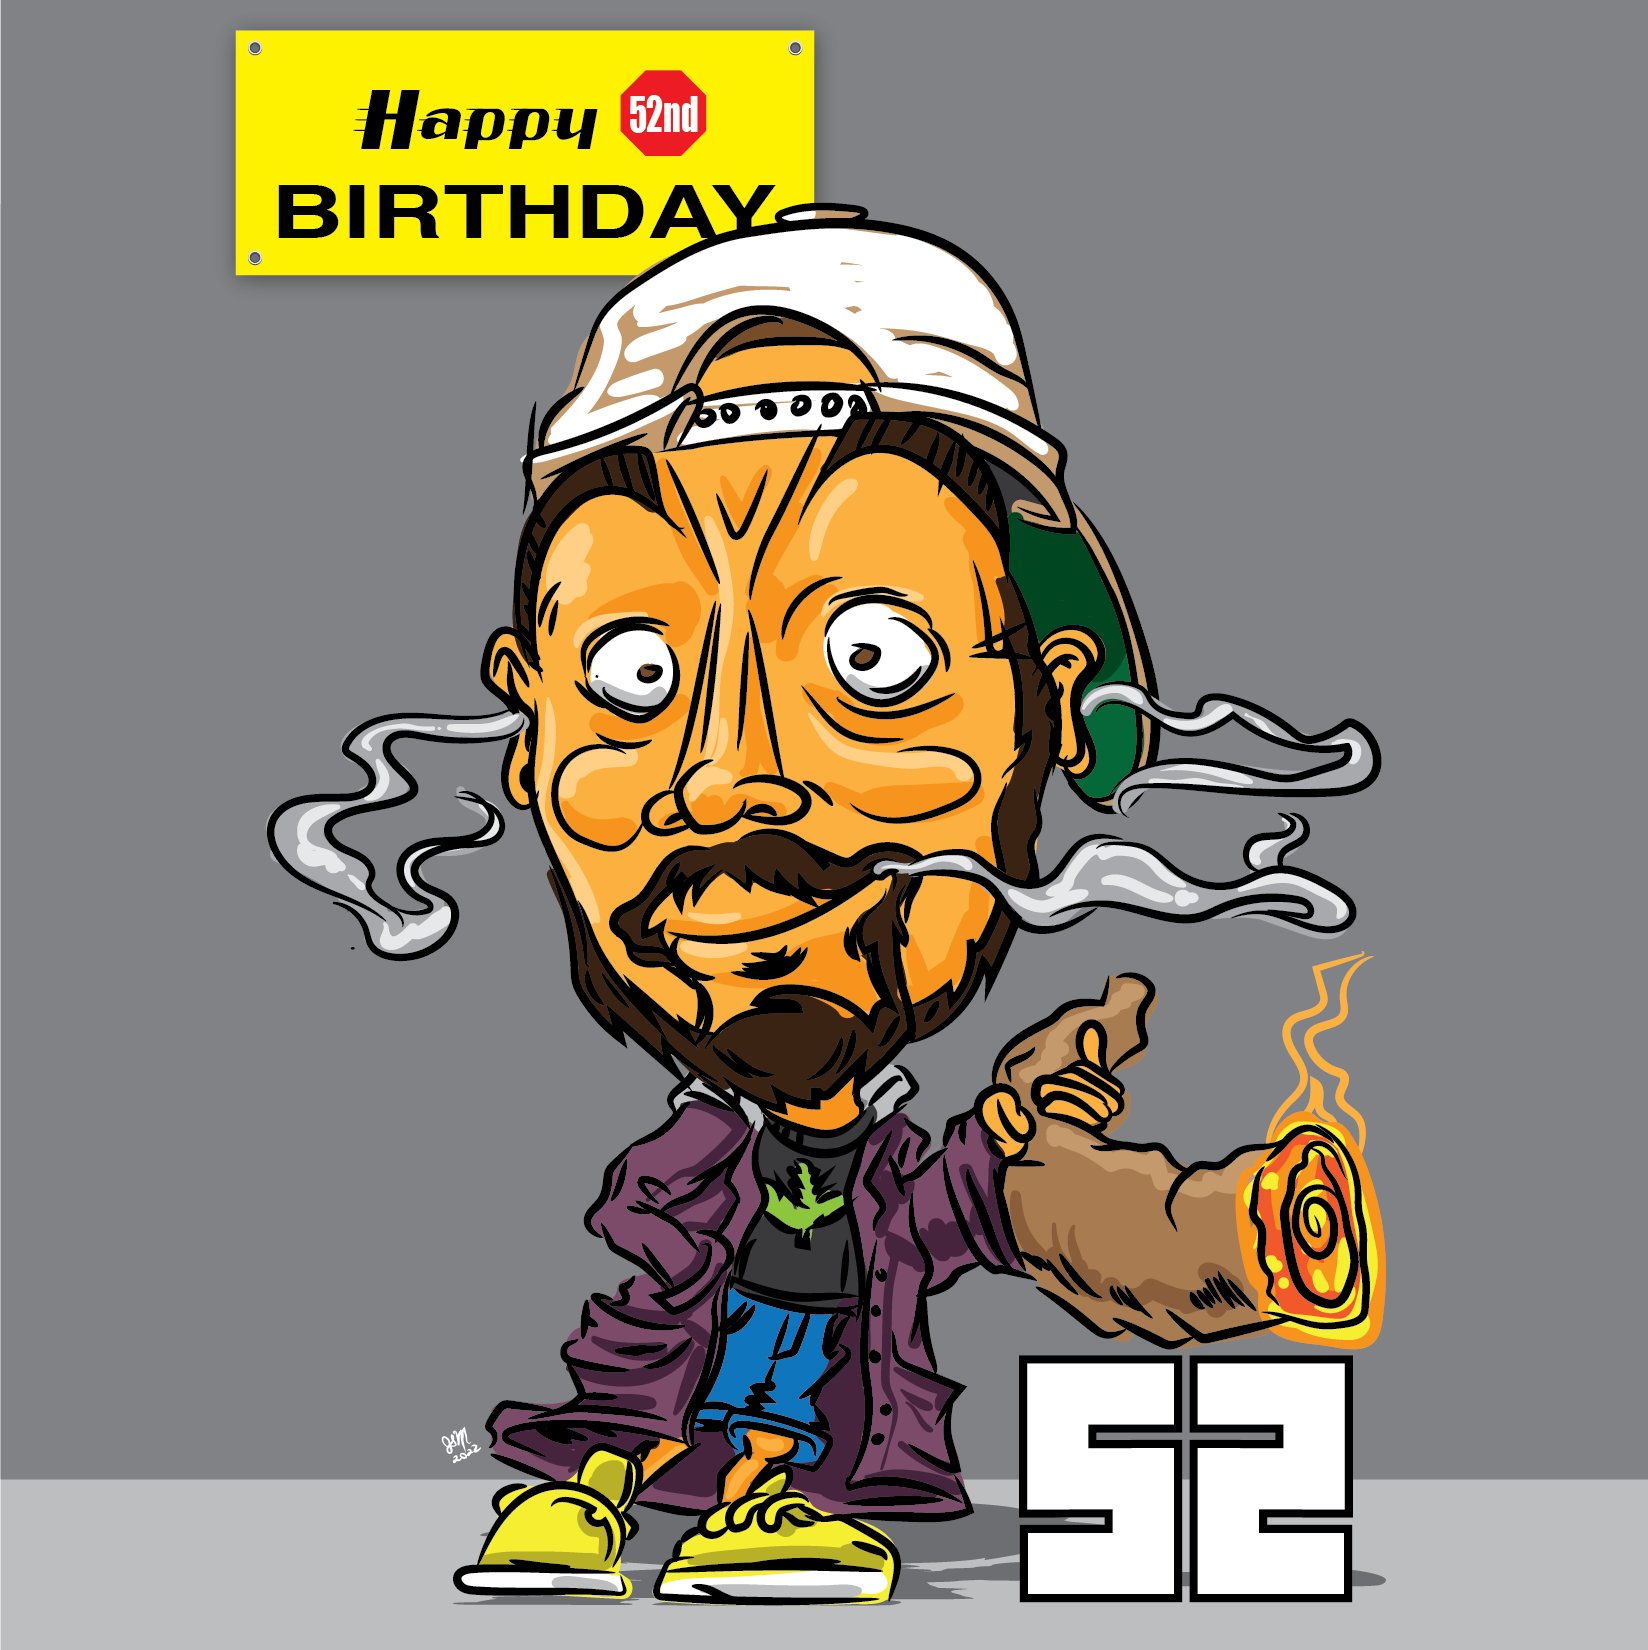 Day late and a dollar short.
Happy Birthday Kevin Smith! 